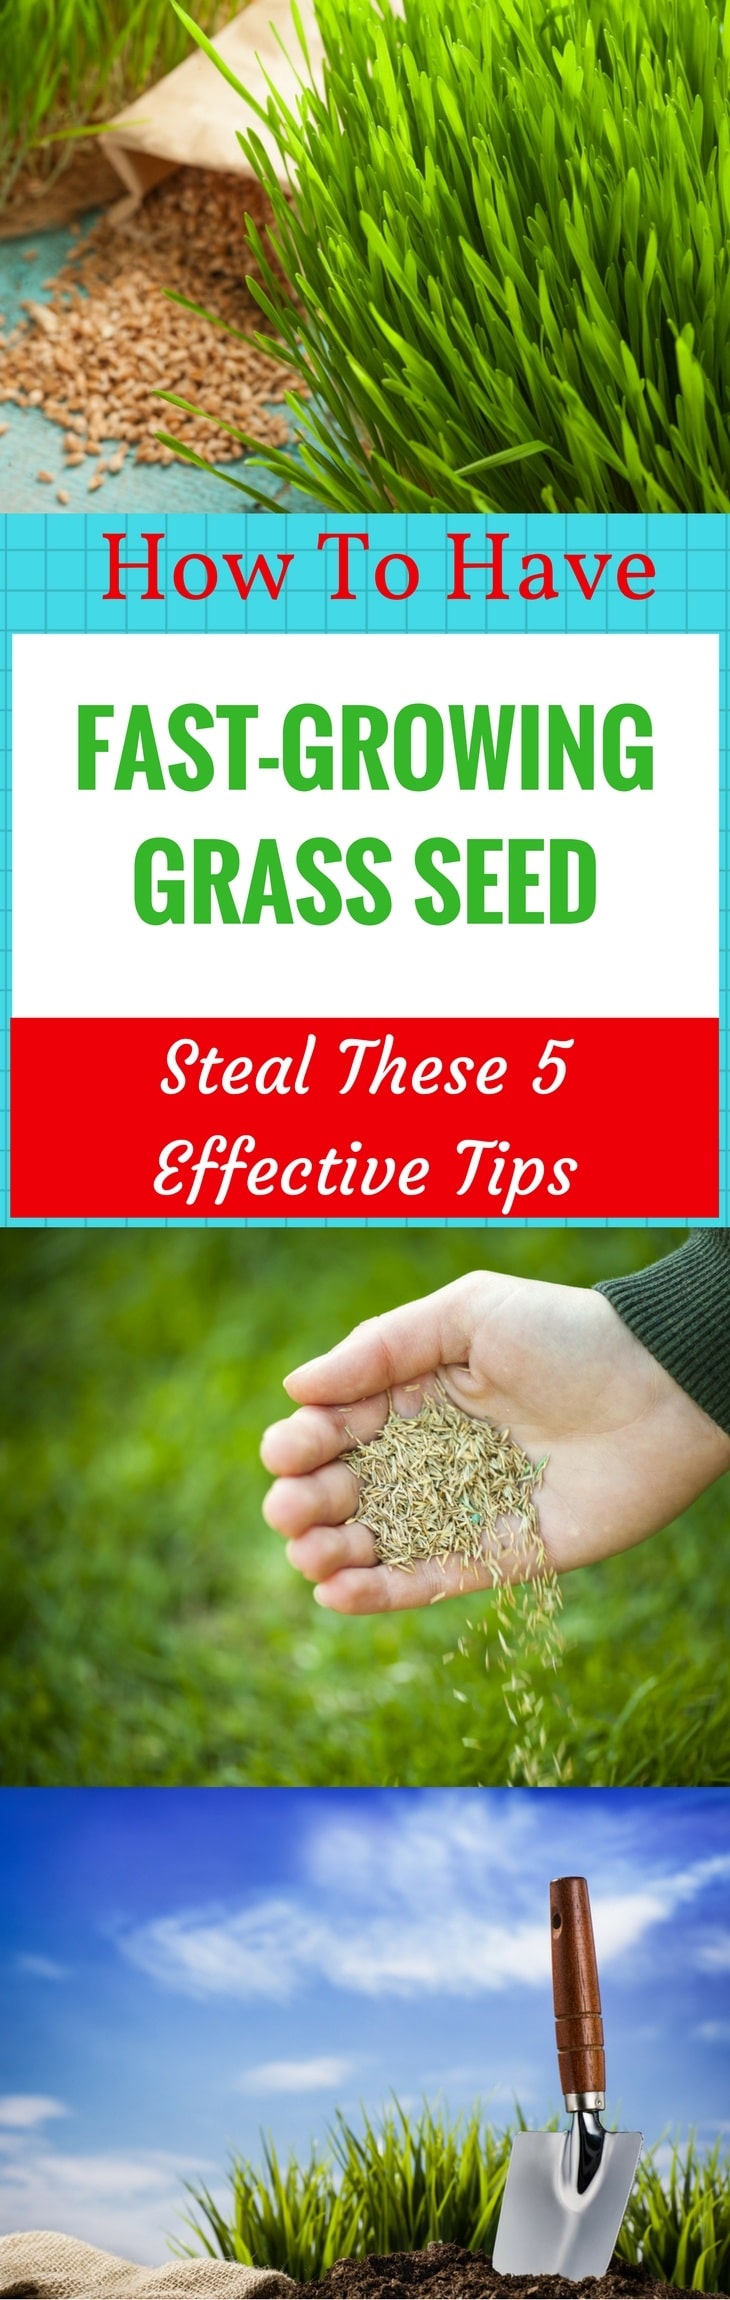 HAVE FAST-GROWING GRASS SEED pin it